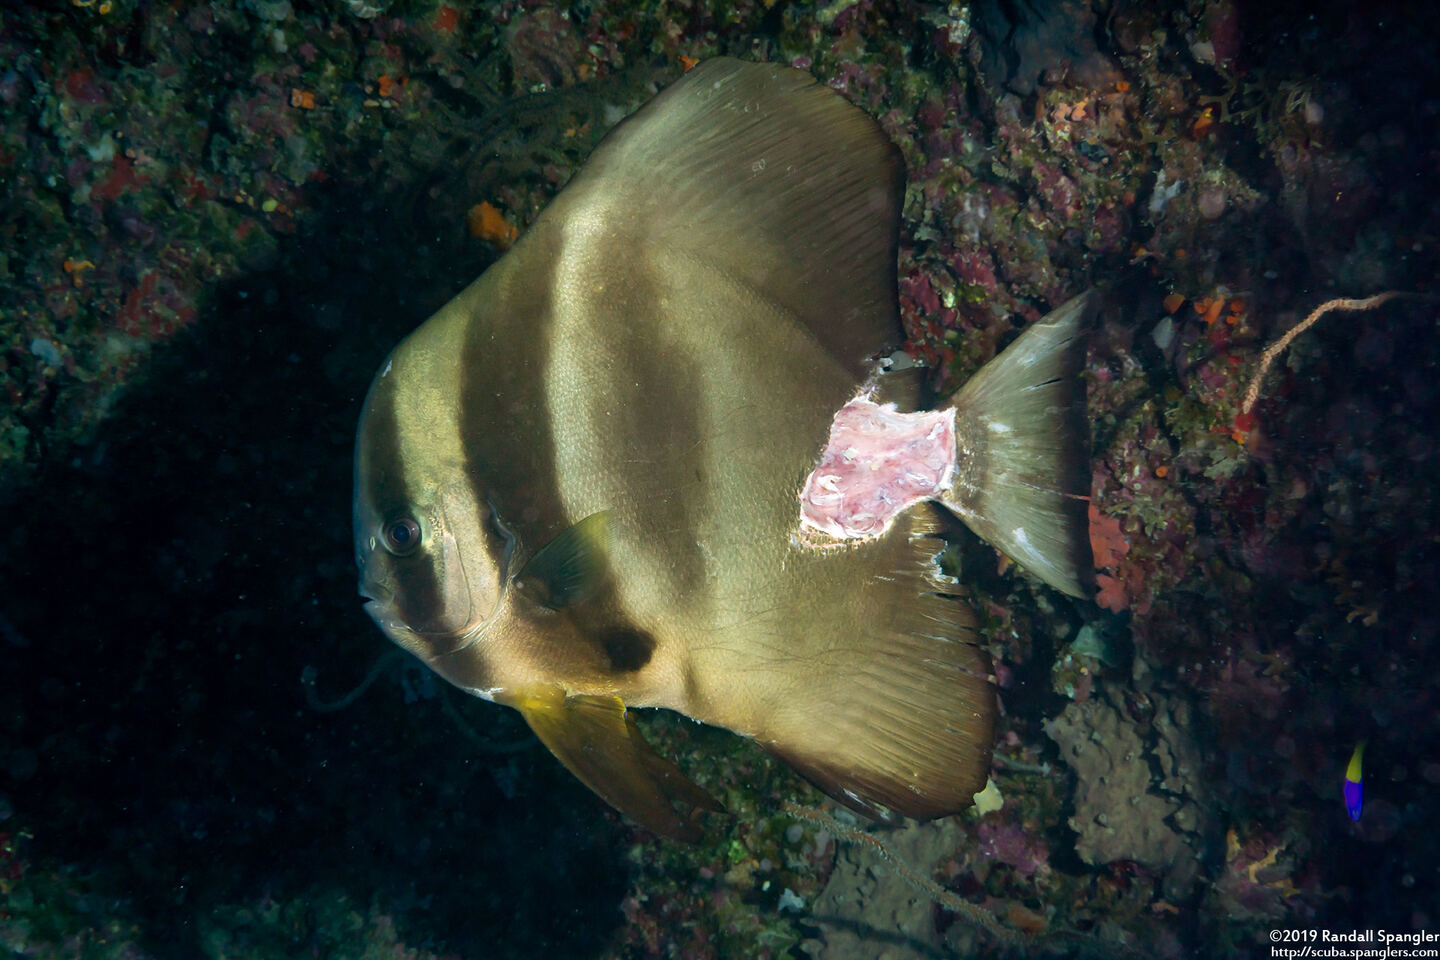 Platax teira (Longfin Spadefish); Something took a bite out of this one